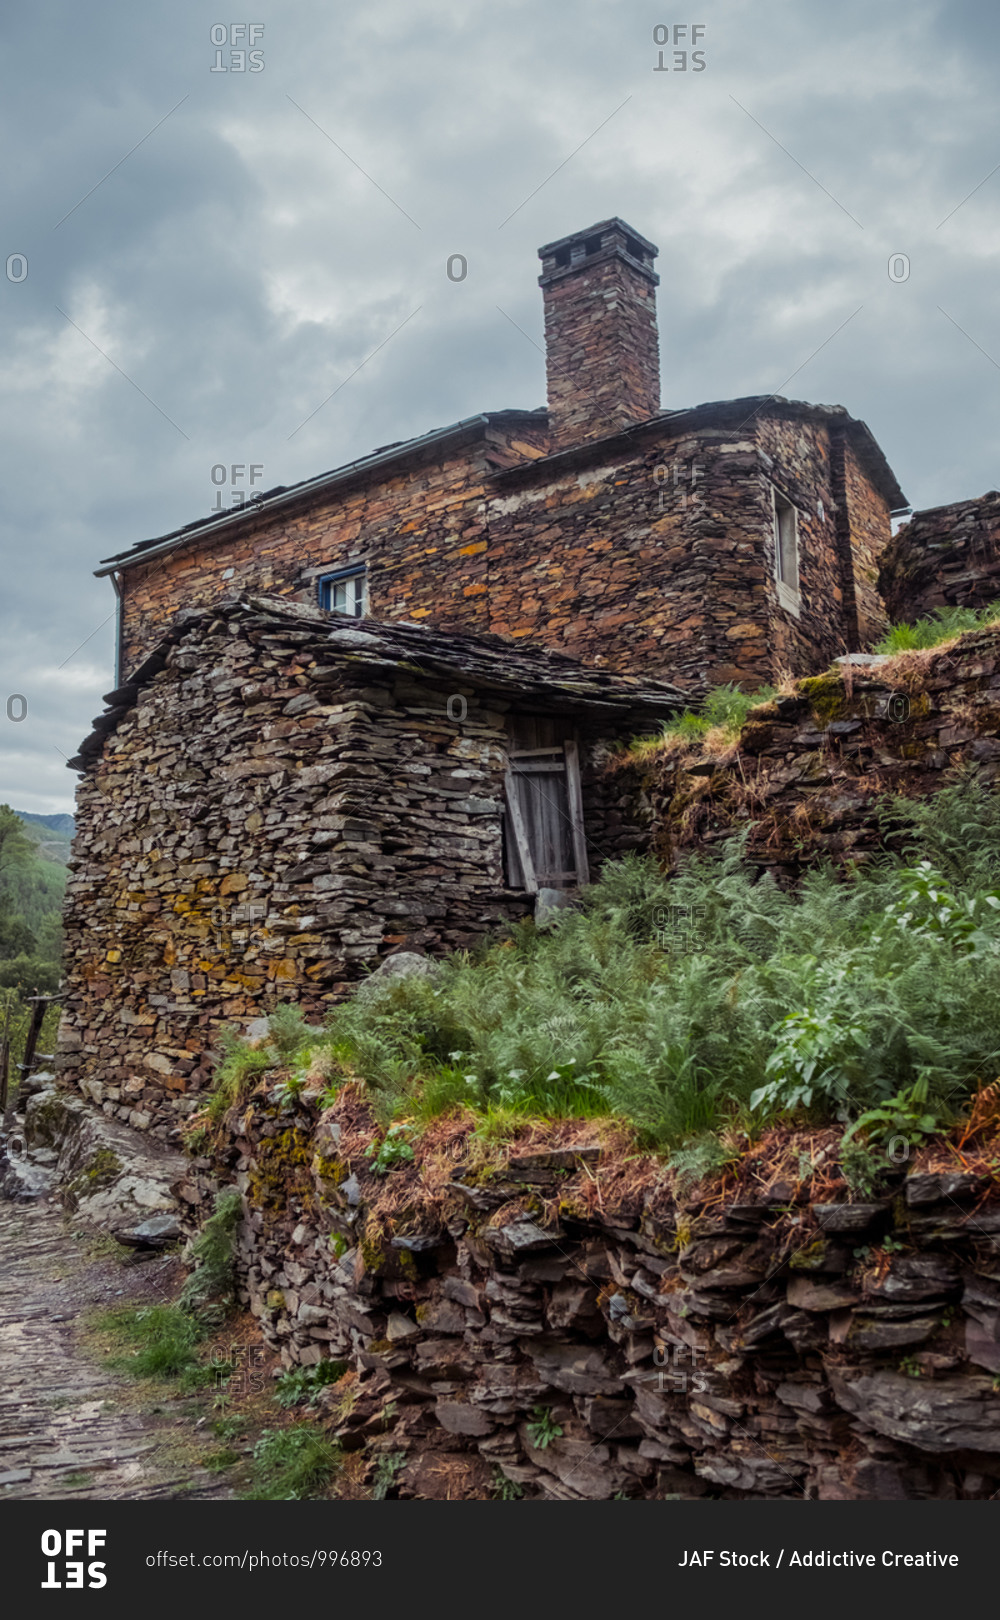 Exterior of old stone house with rough surface and chimney on top near green plants and pathway under cloudy sky